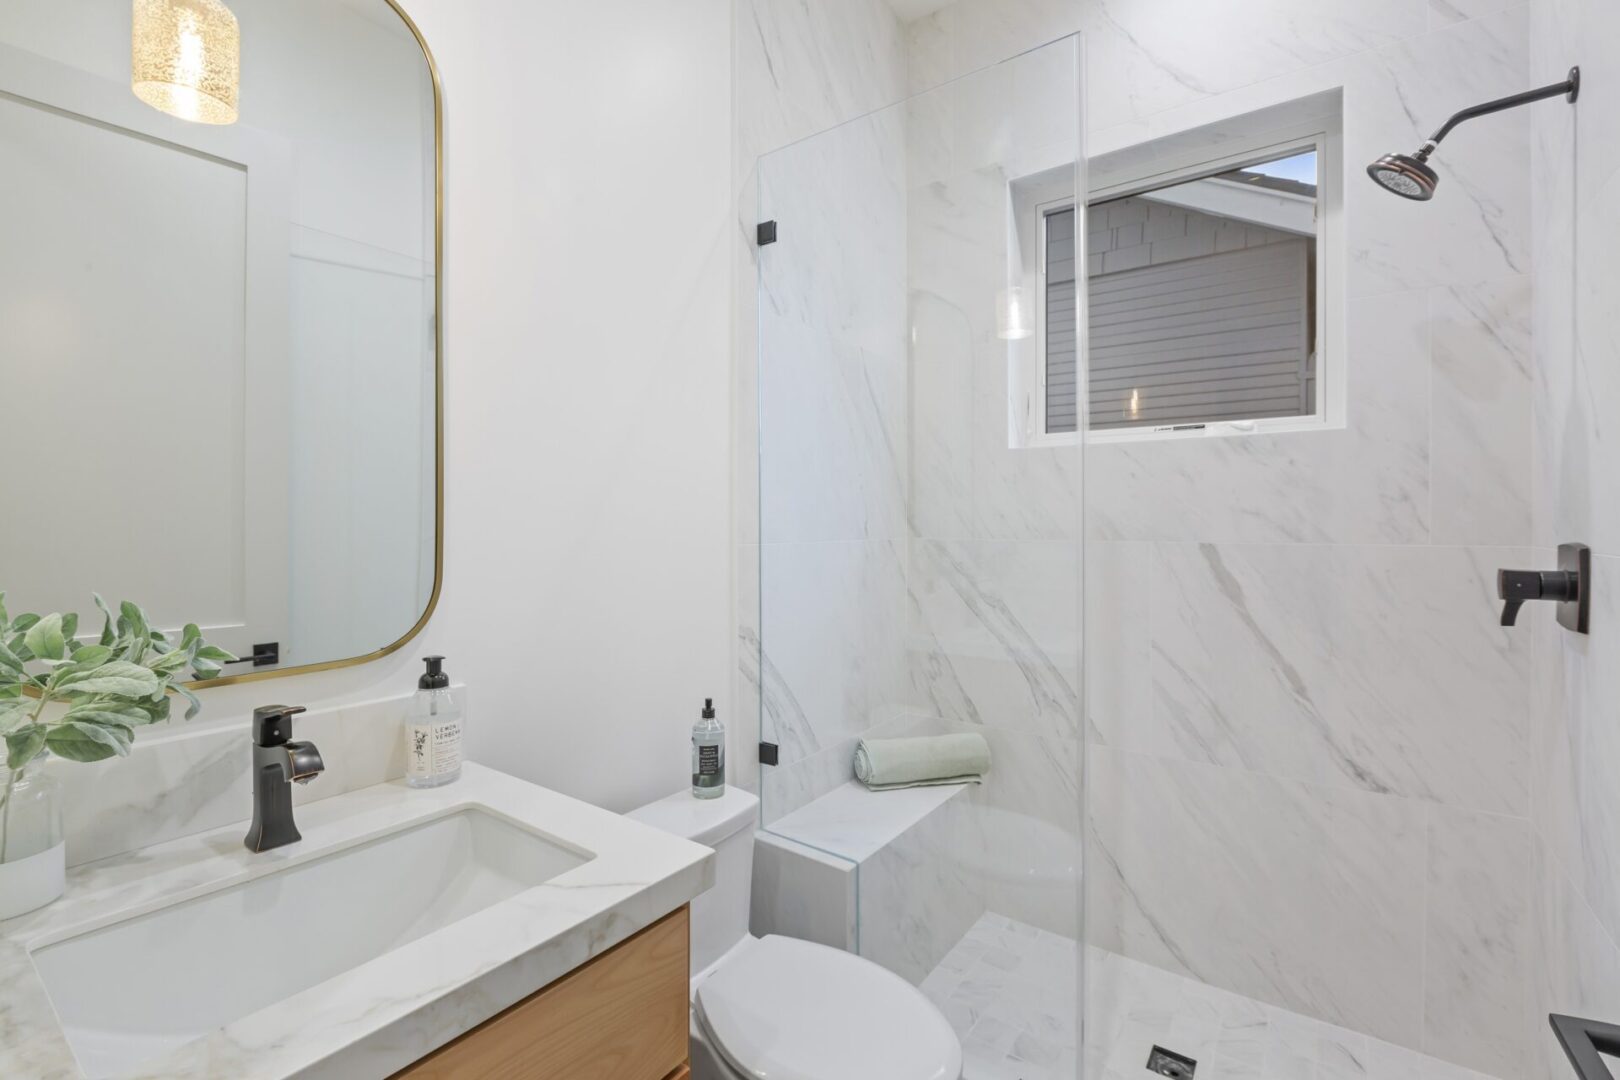 A bathroom with white walls and marble floors.